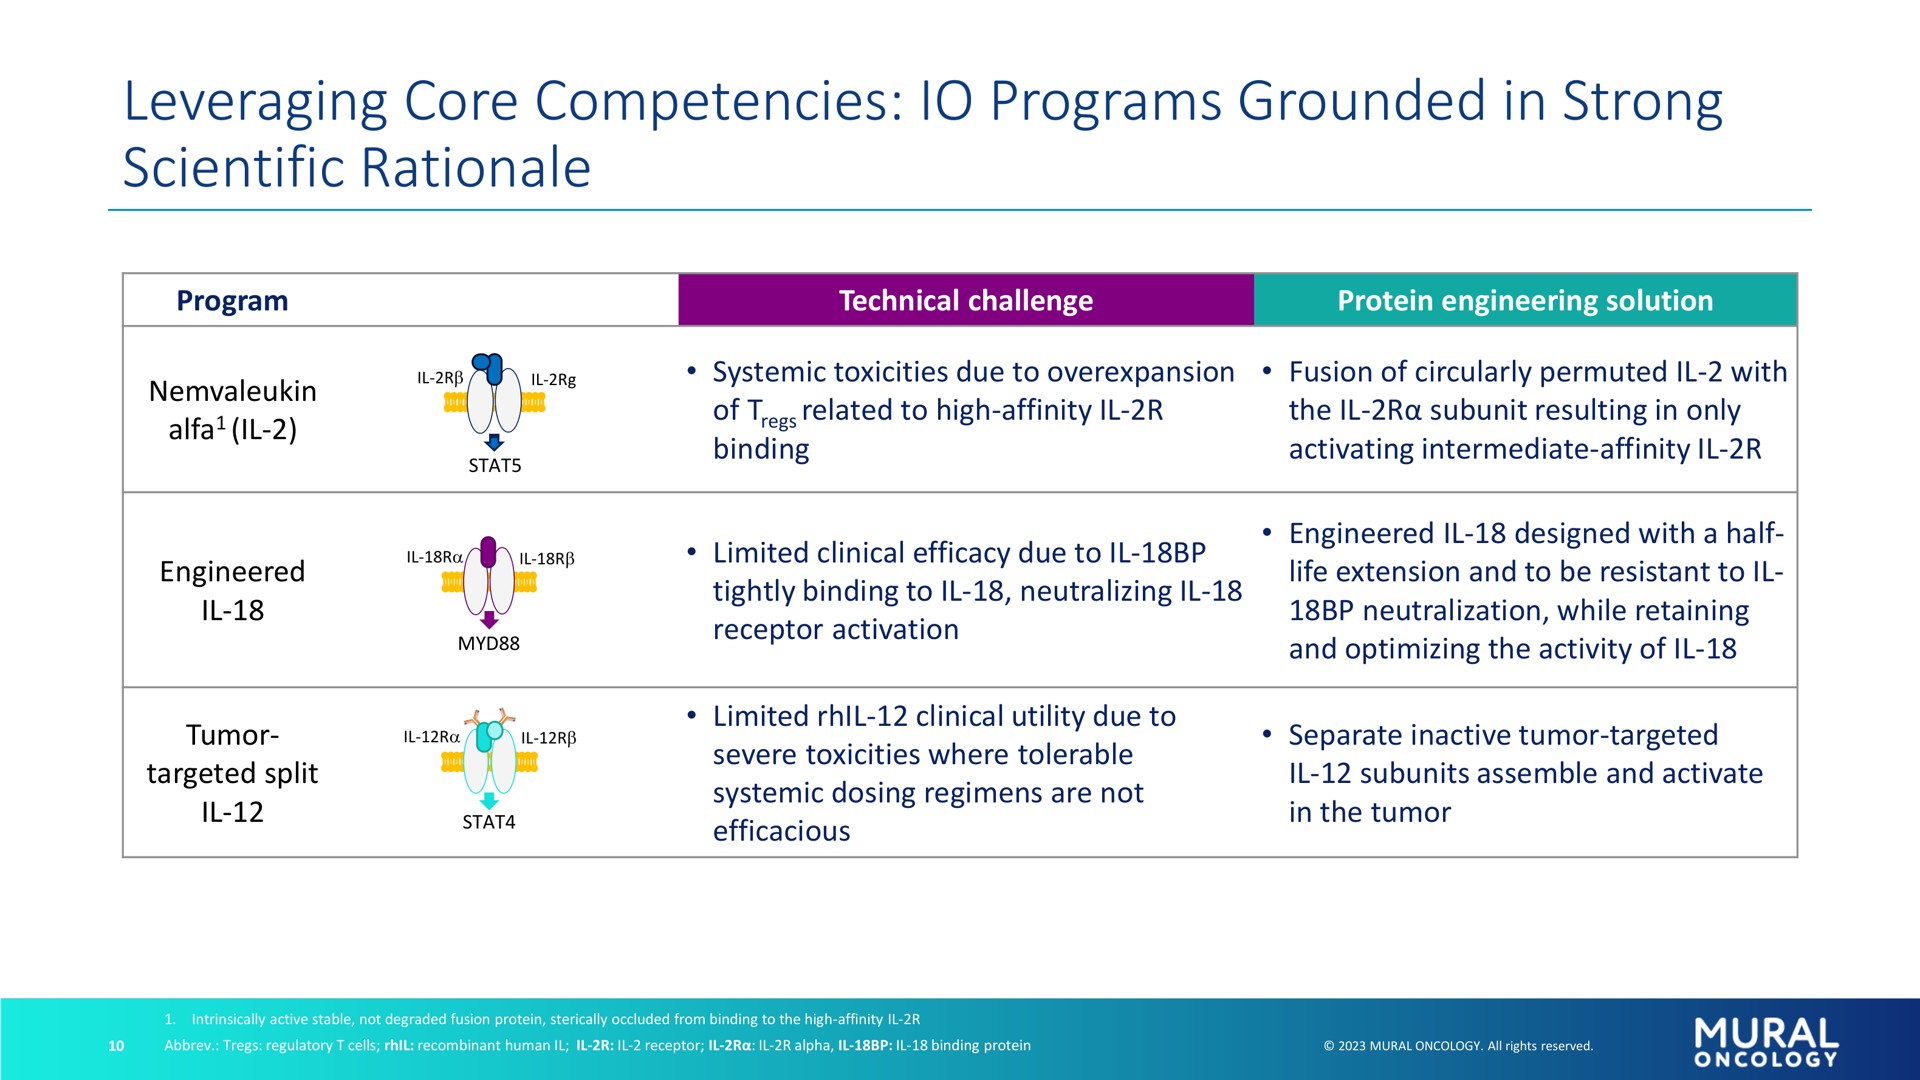 leveraging core competencies programs grounded in strong scientific rationale | Alkermes